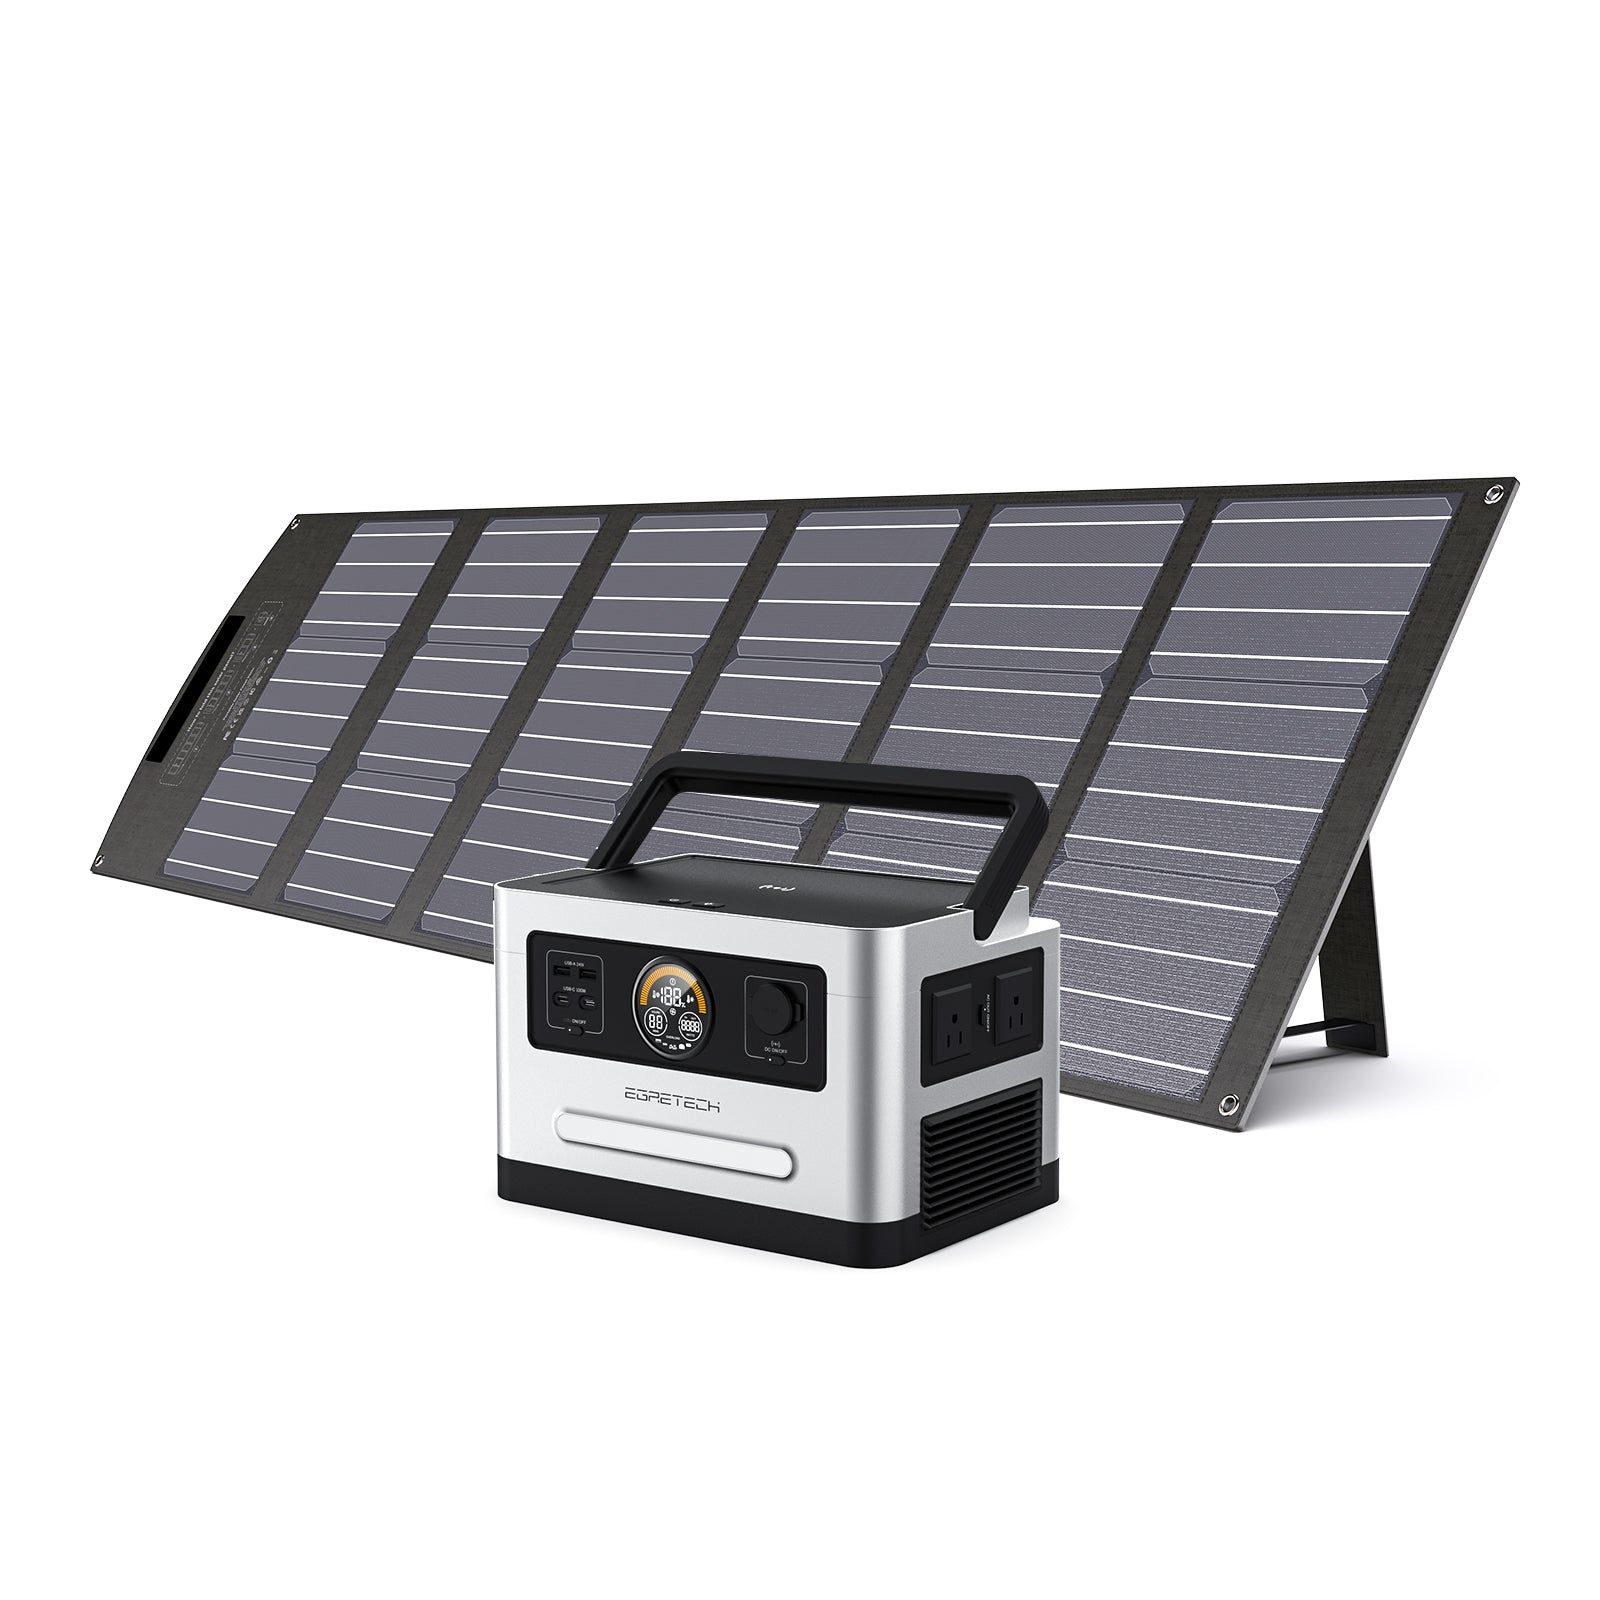 EGRETECH 1200W Portable Power Station with Foldable Solar Panel